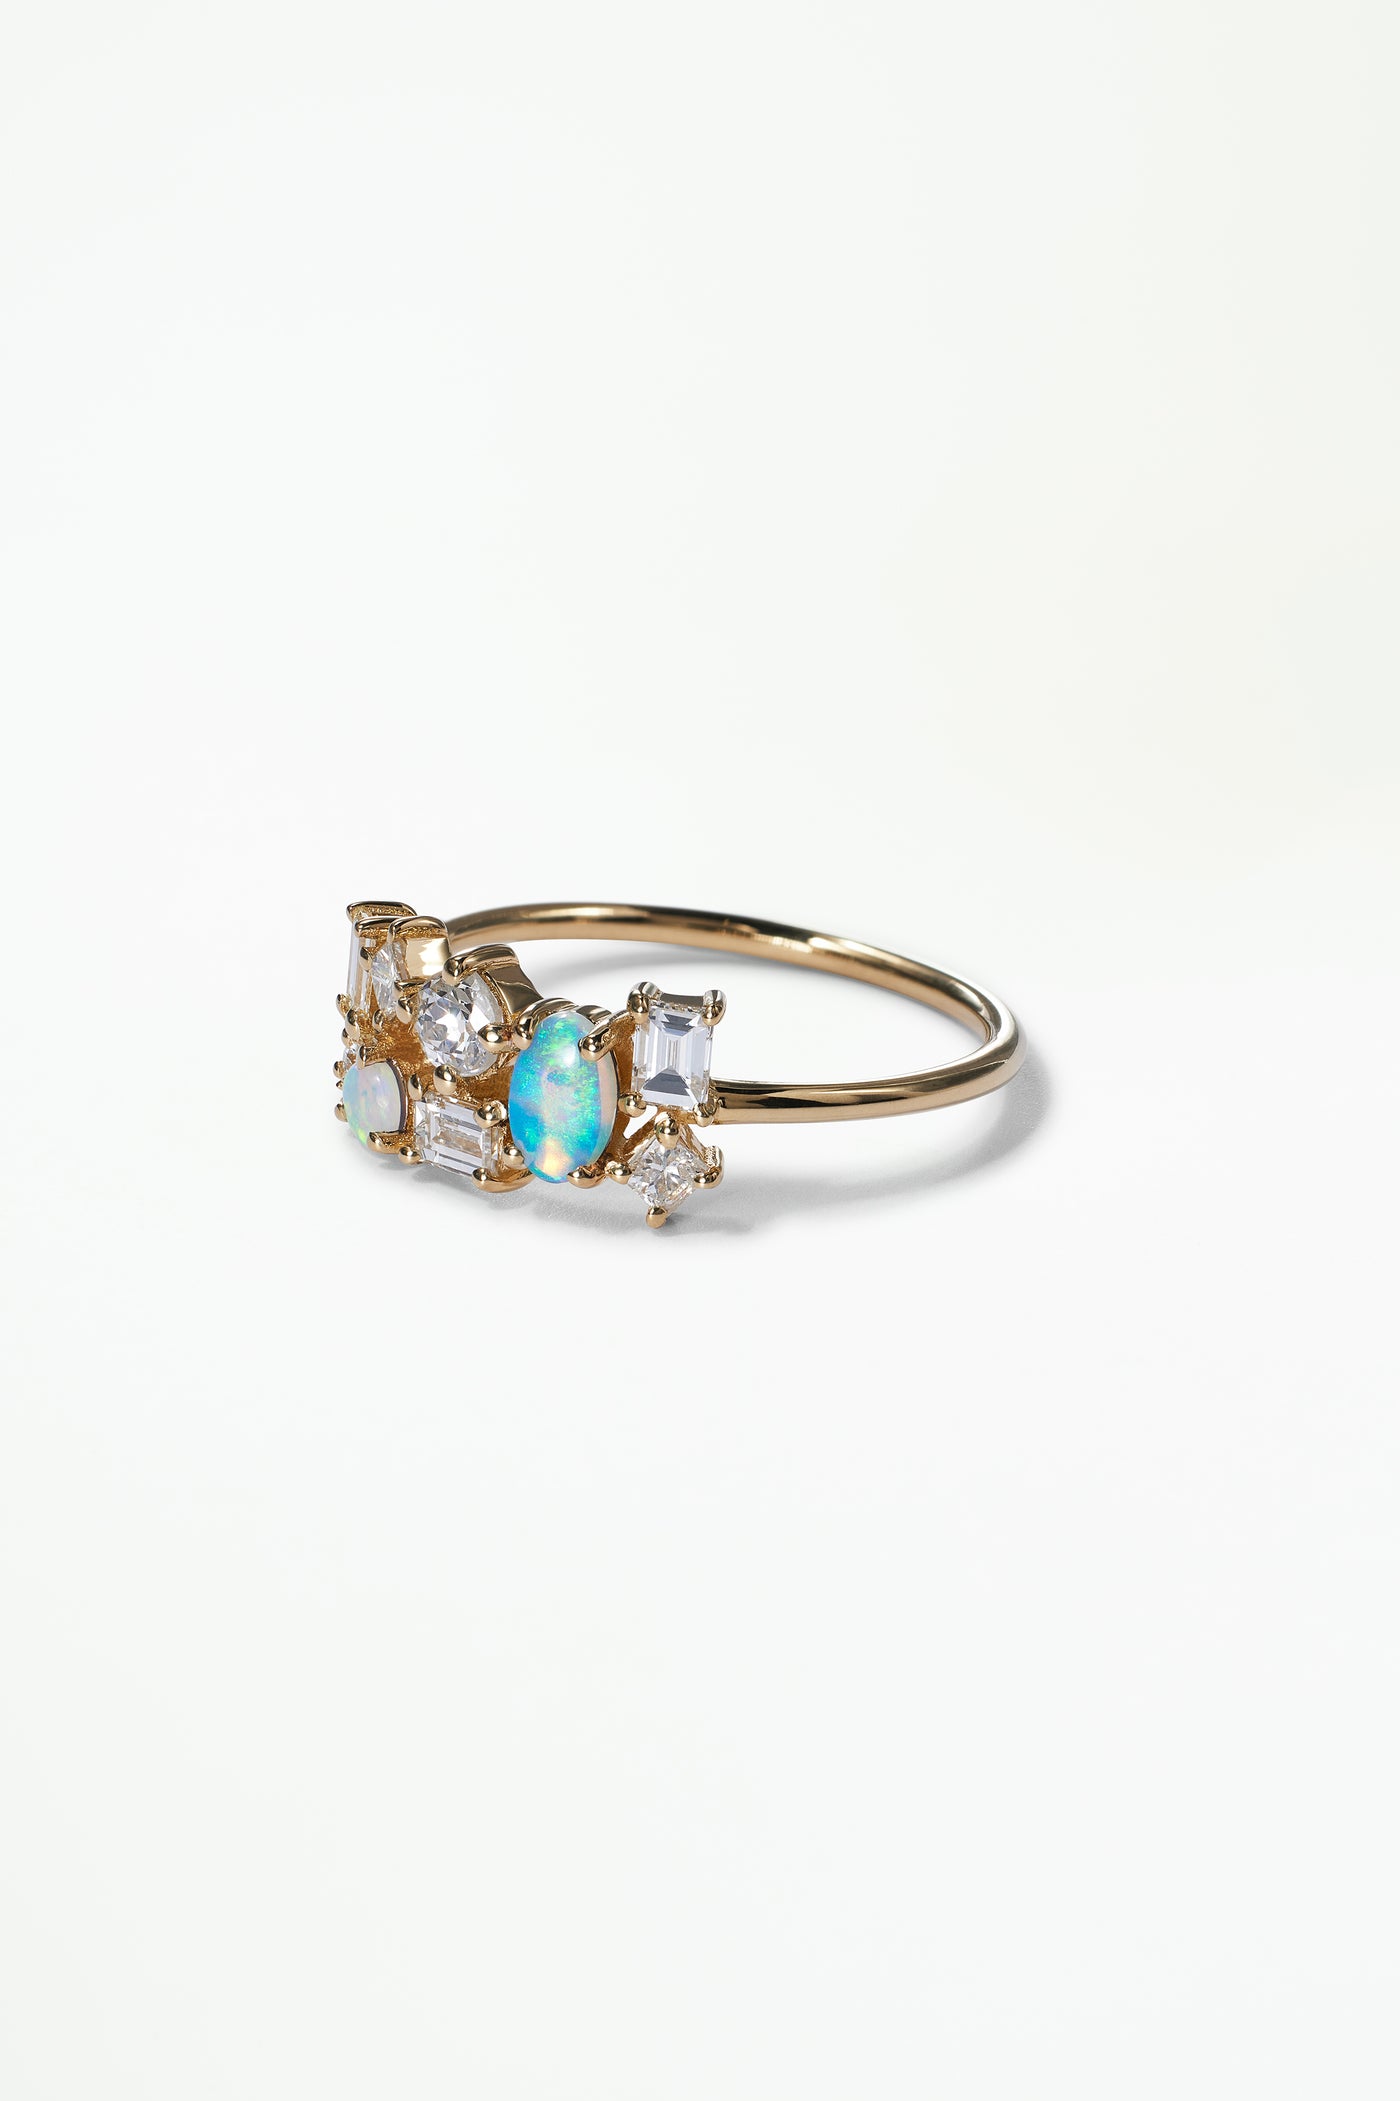 One of a Kind Diamond and Opal Mosaic Ring No. 32